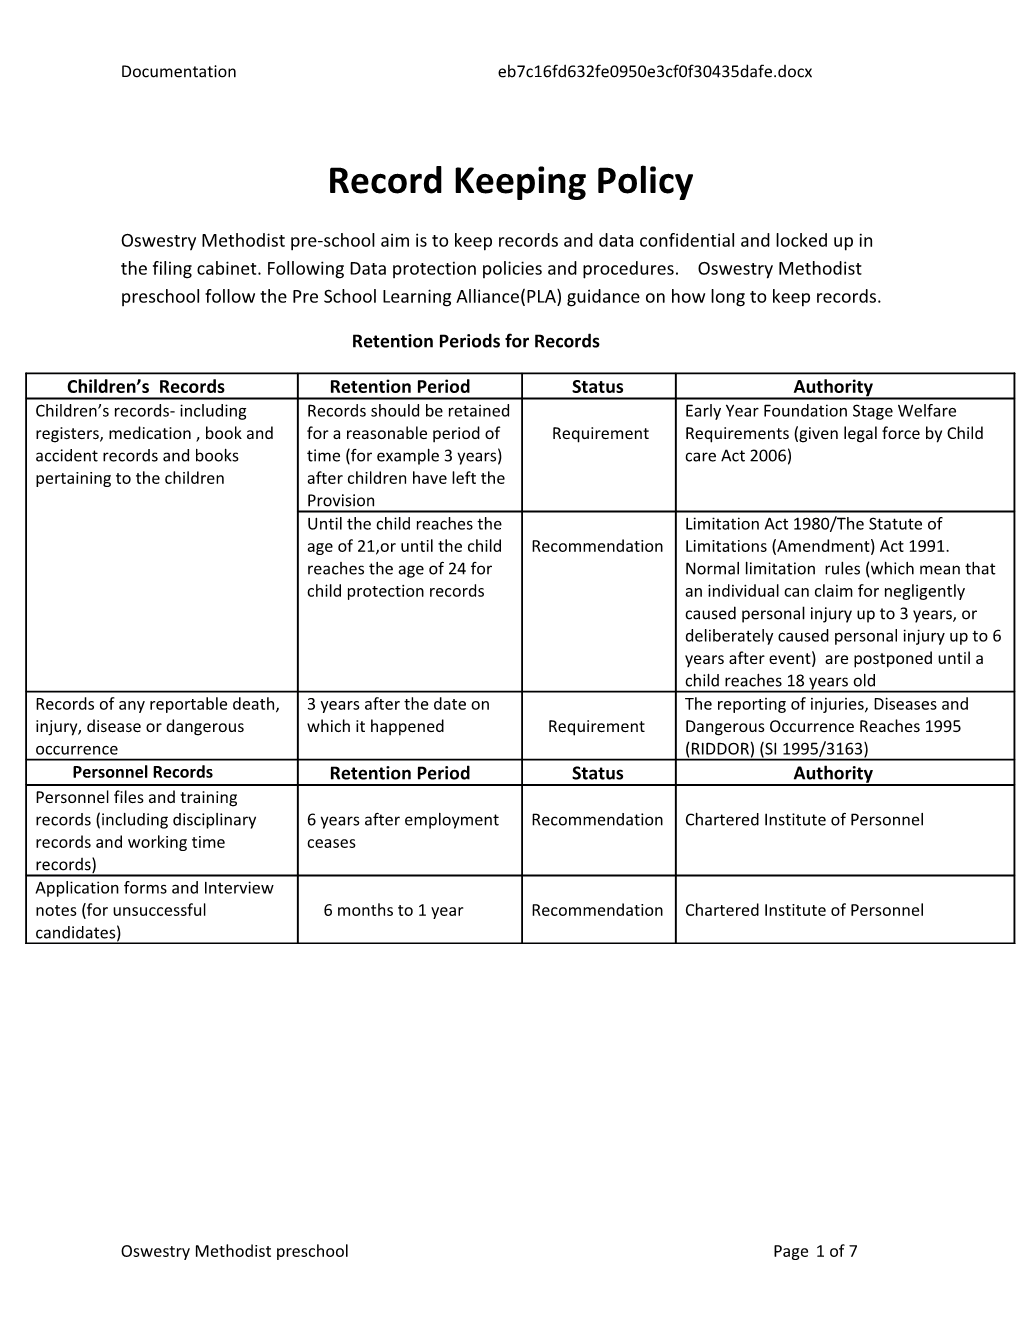 Record Keeping Policy